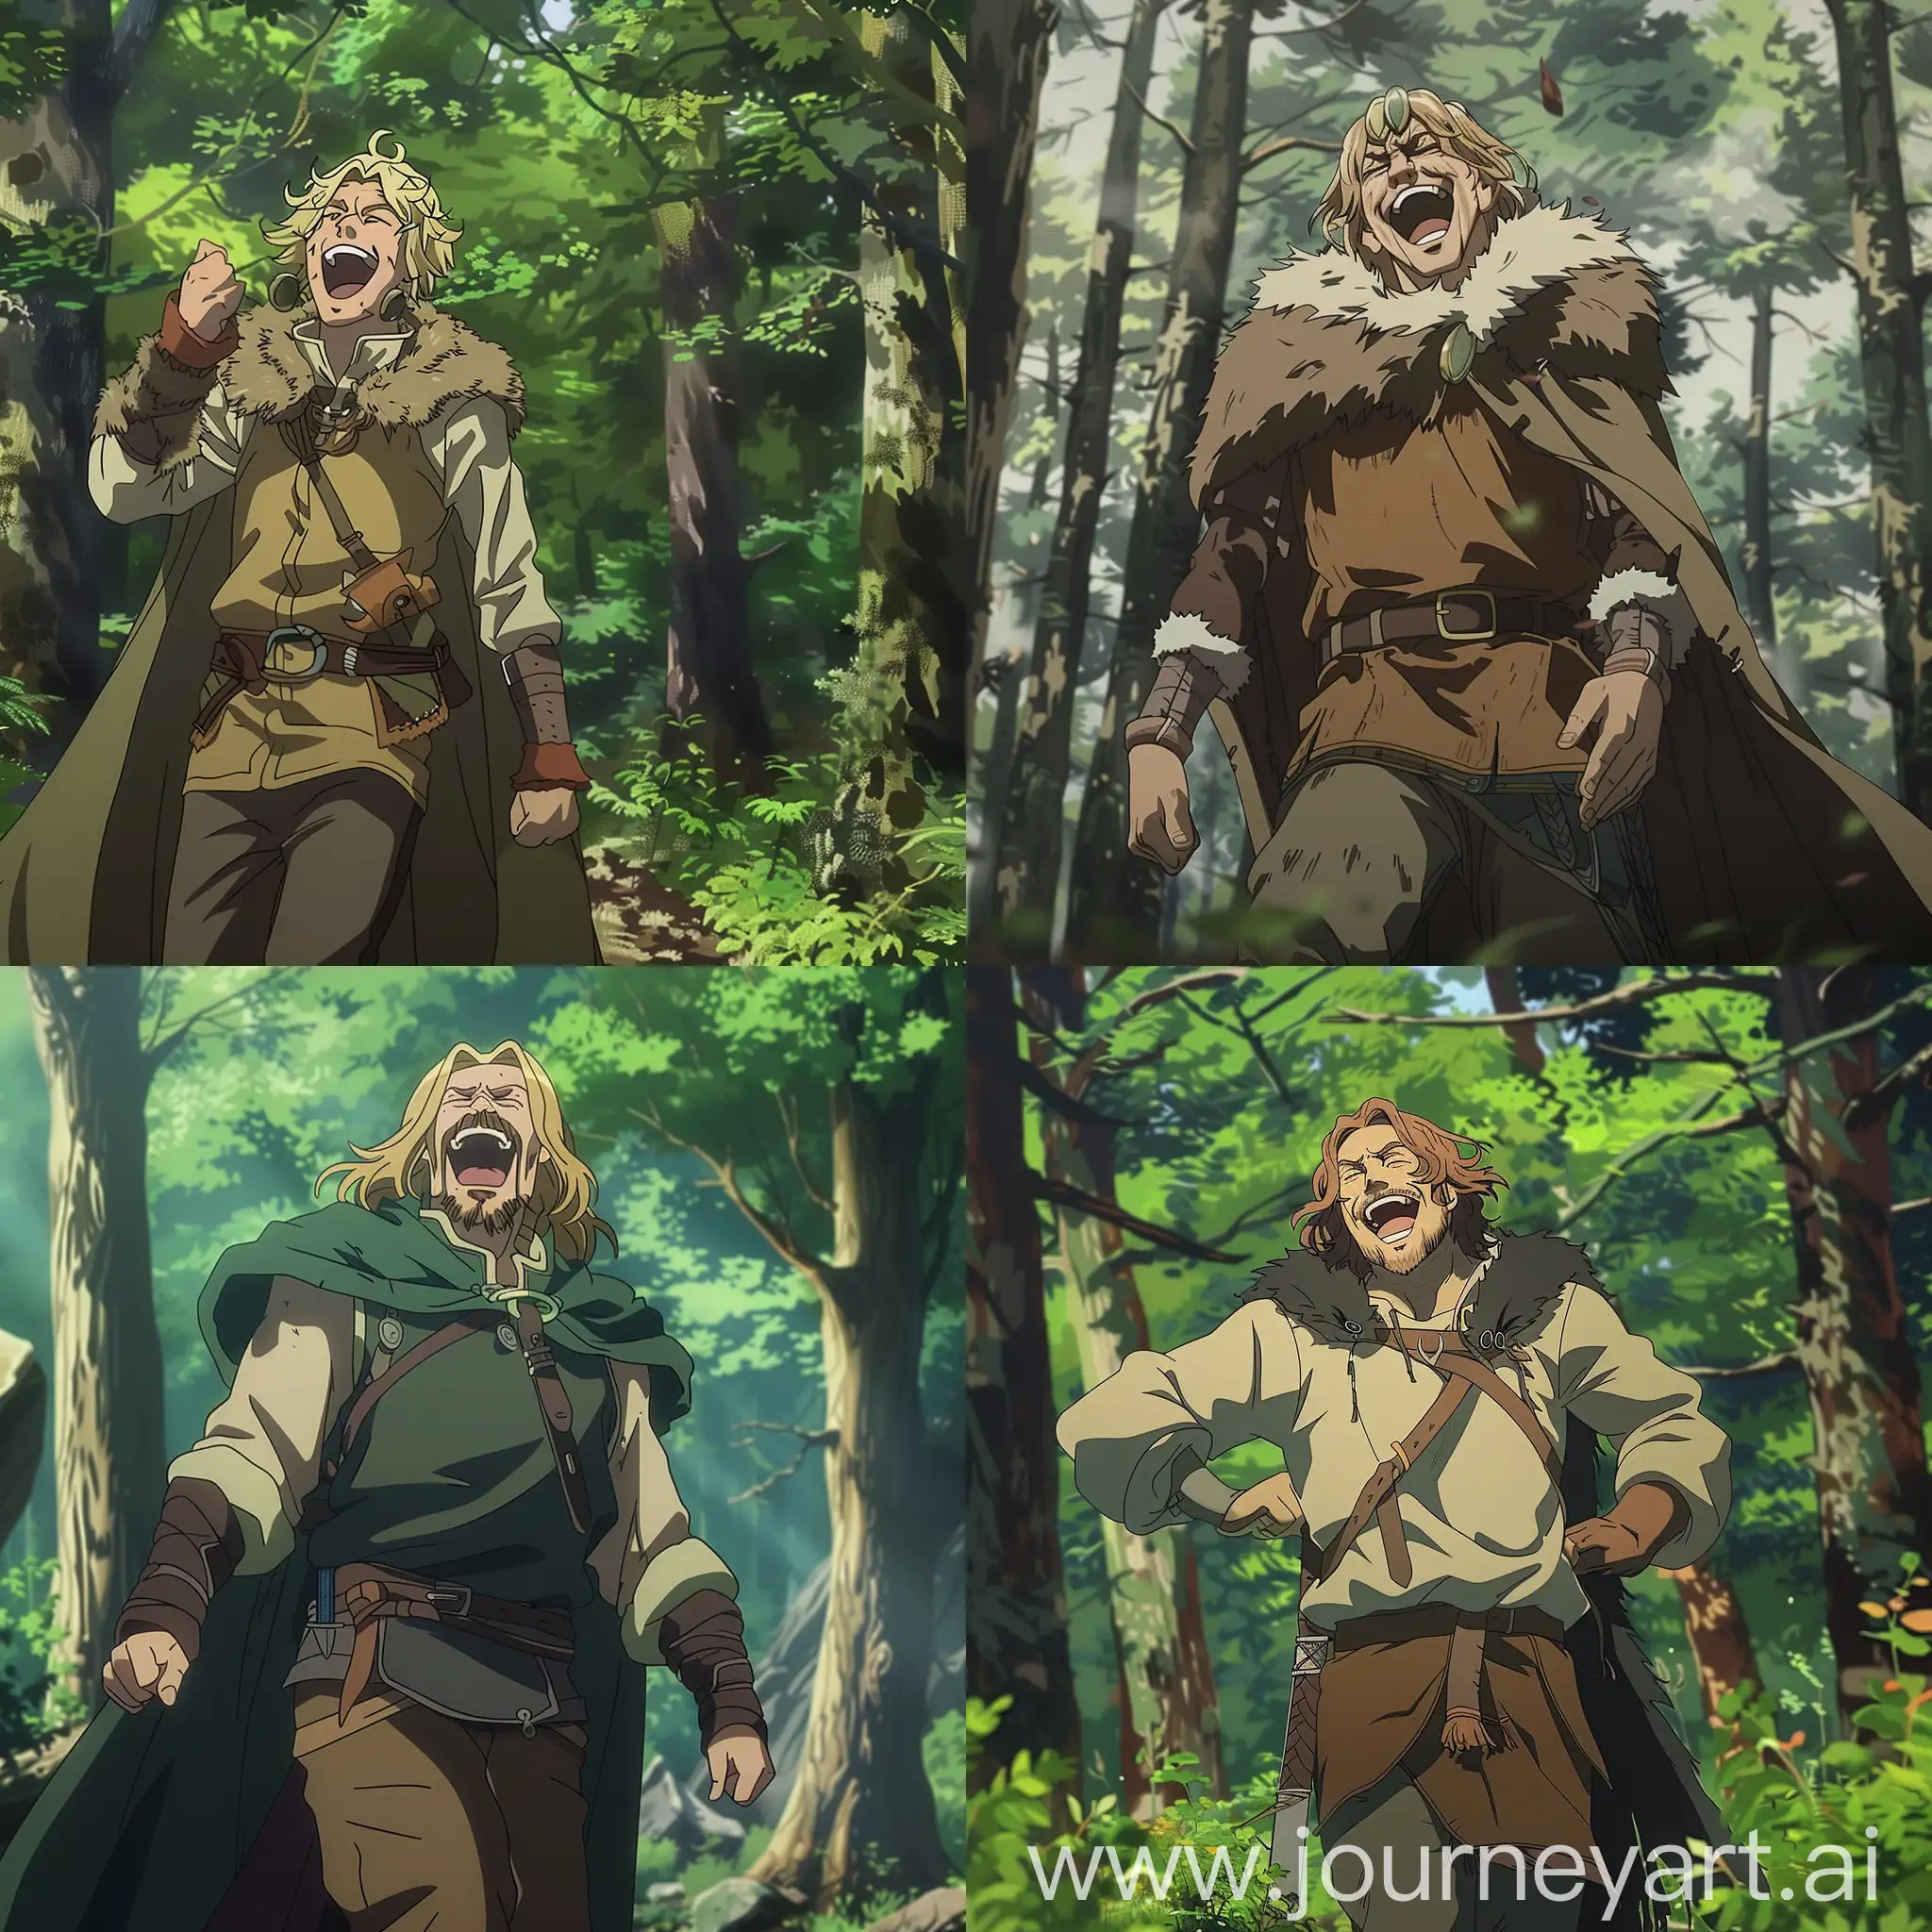 Thors-from-Vinland-Saga-Anime-Laughing-in-Forest-Stroll